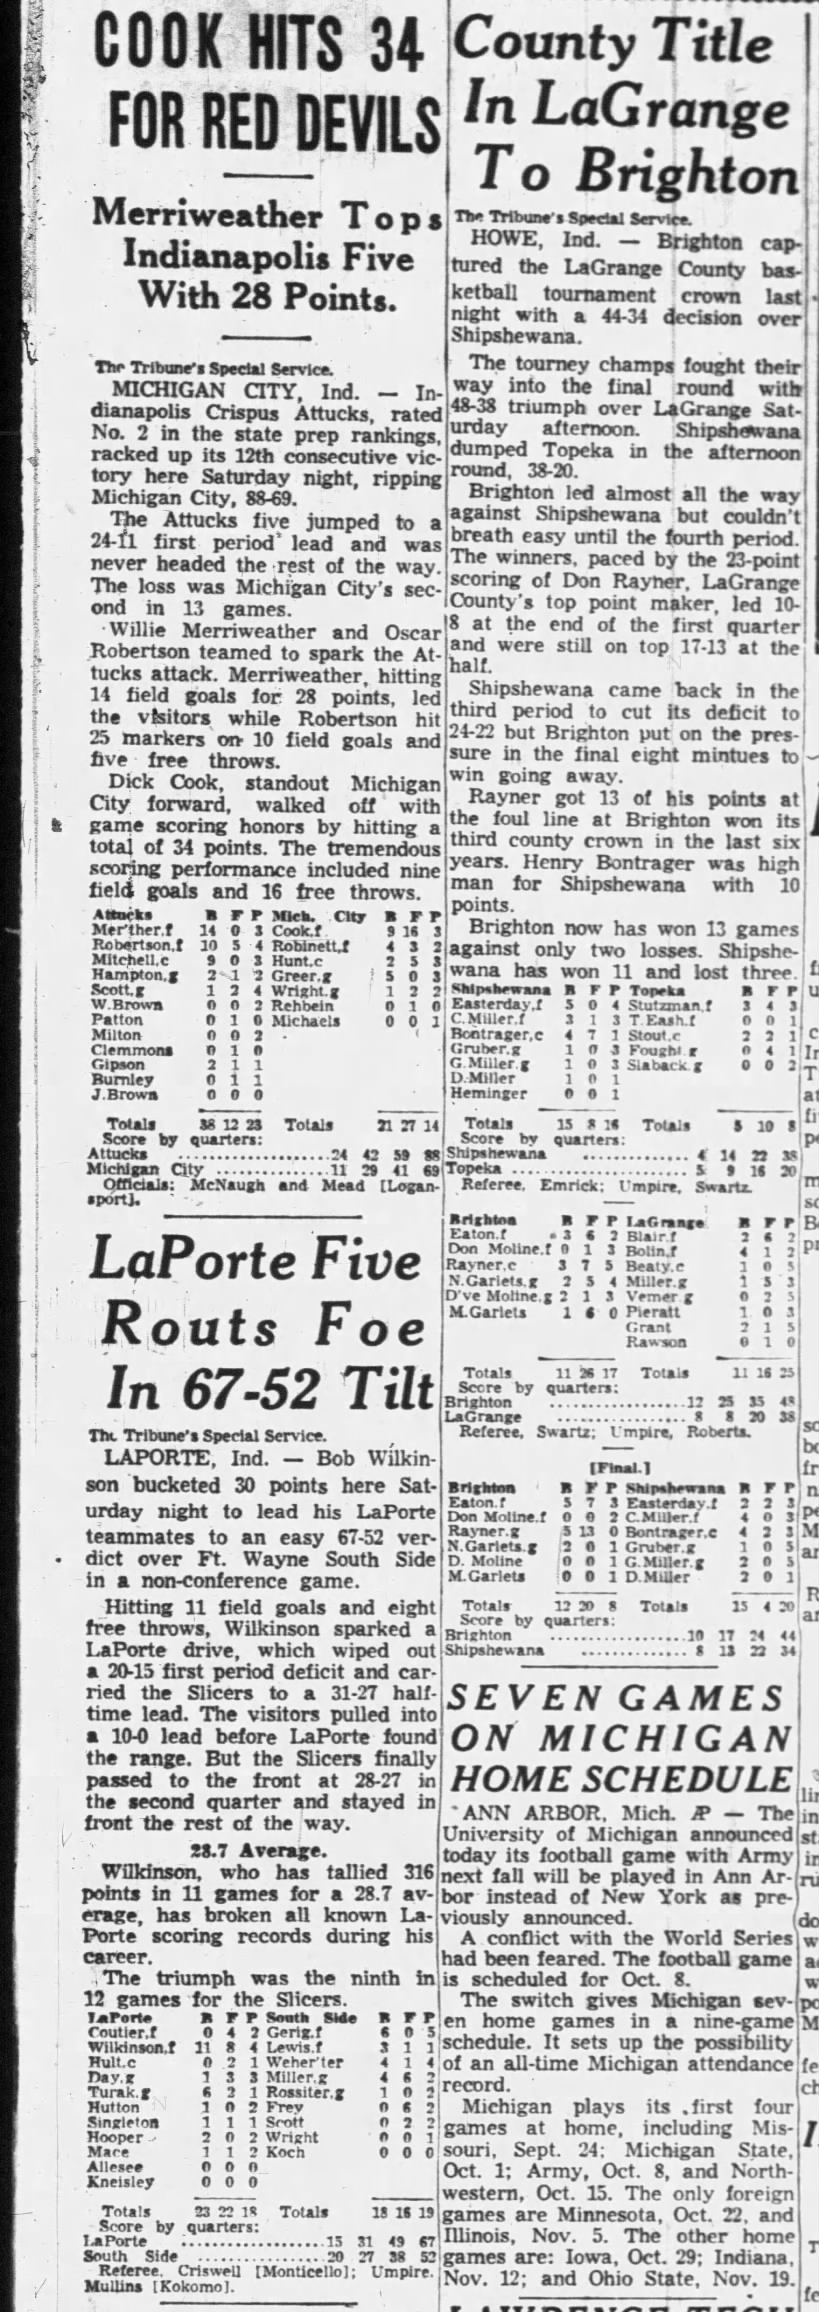 3 Games from South Bend Tribune Jan. 1955